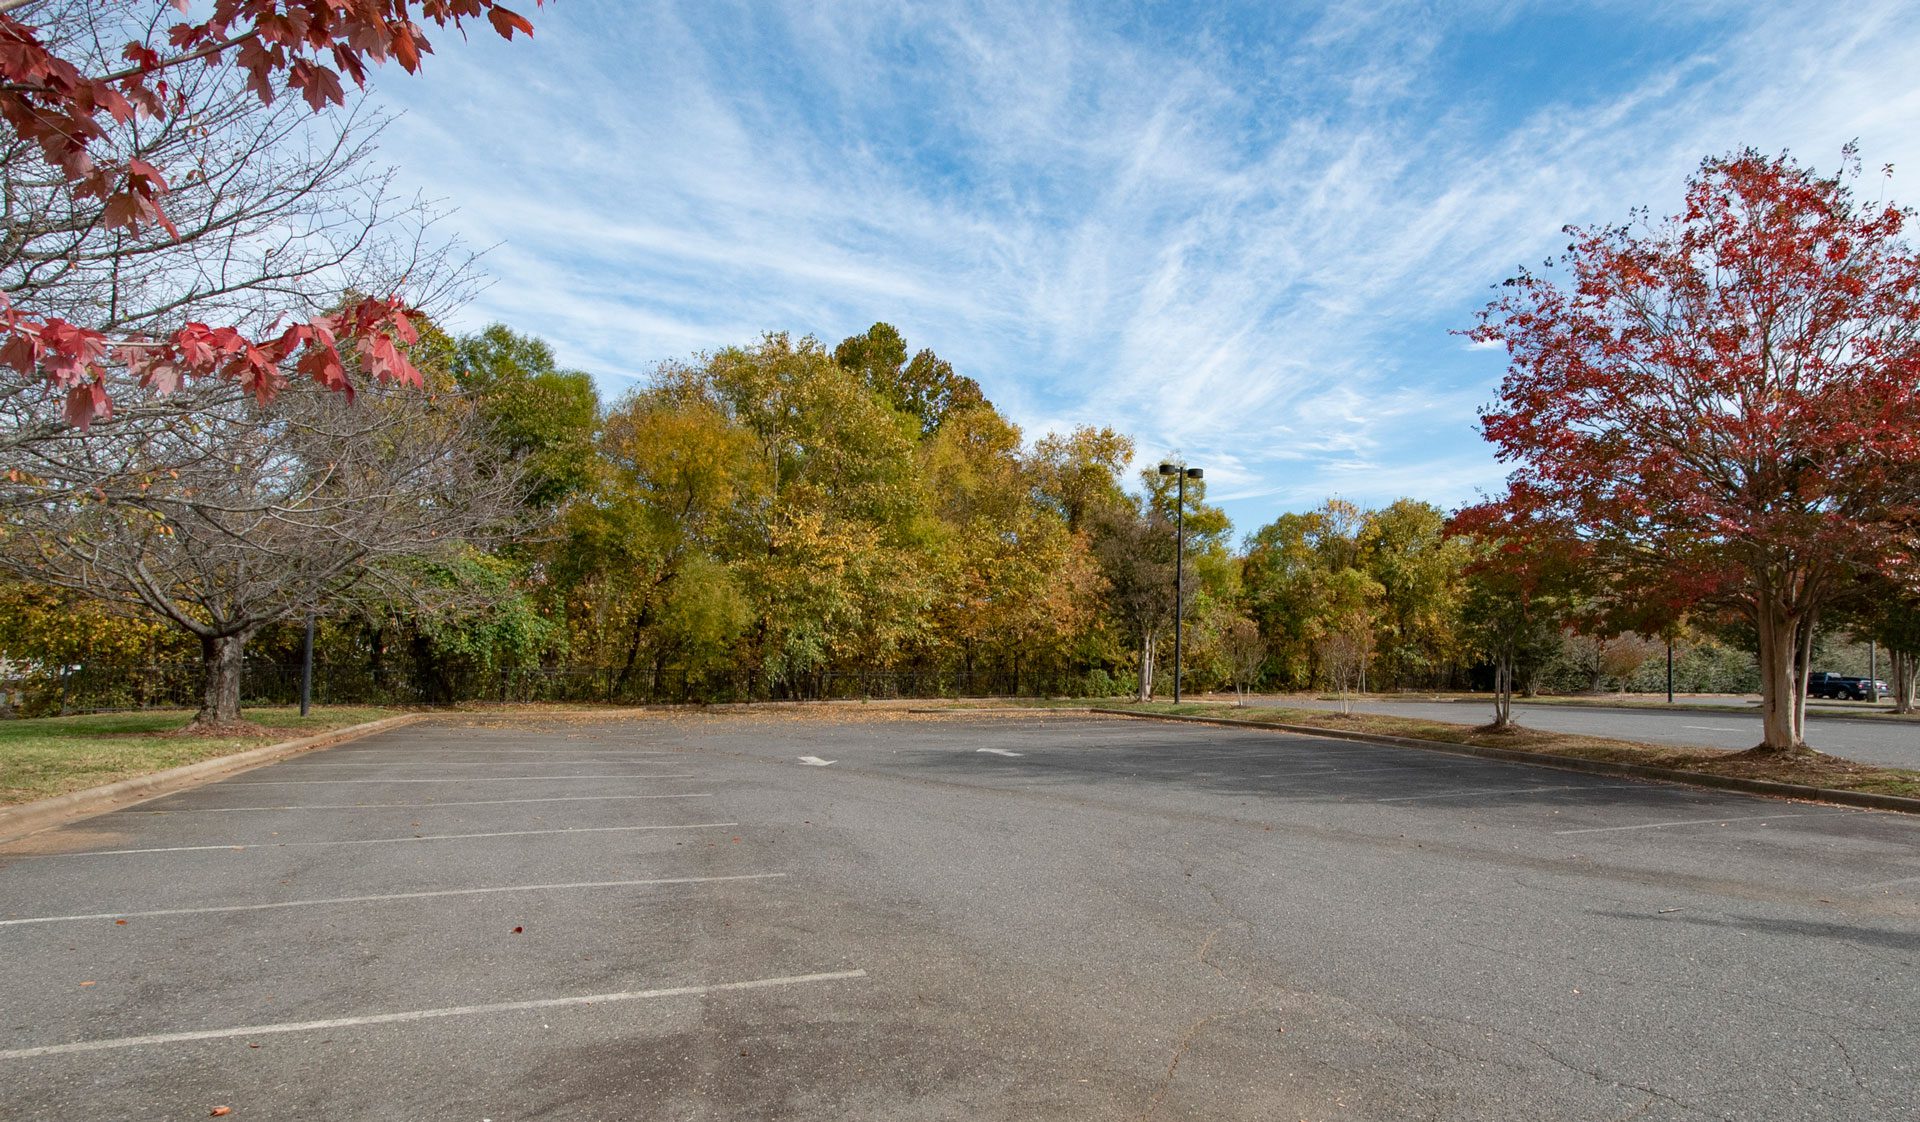 empty parking lot with fall trees surrounding perimiter